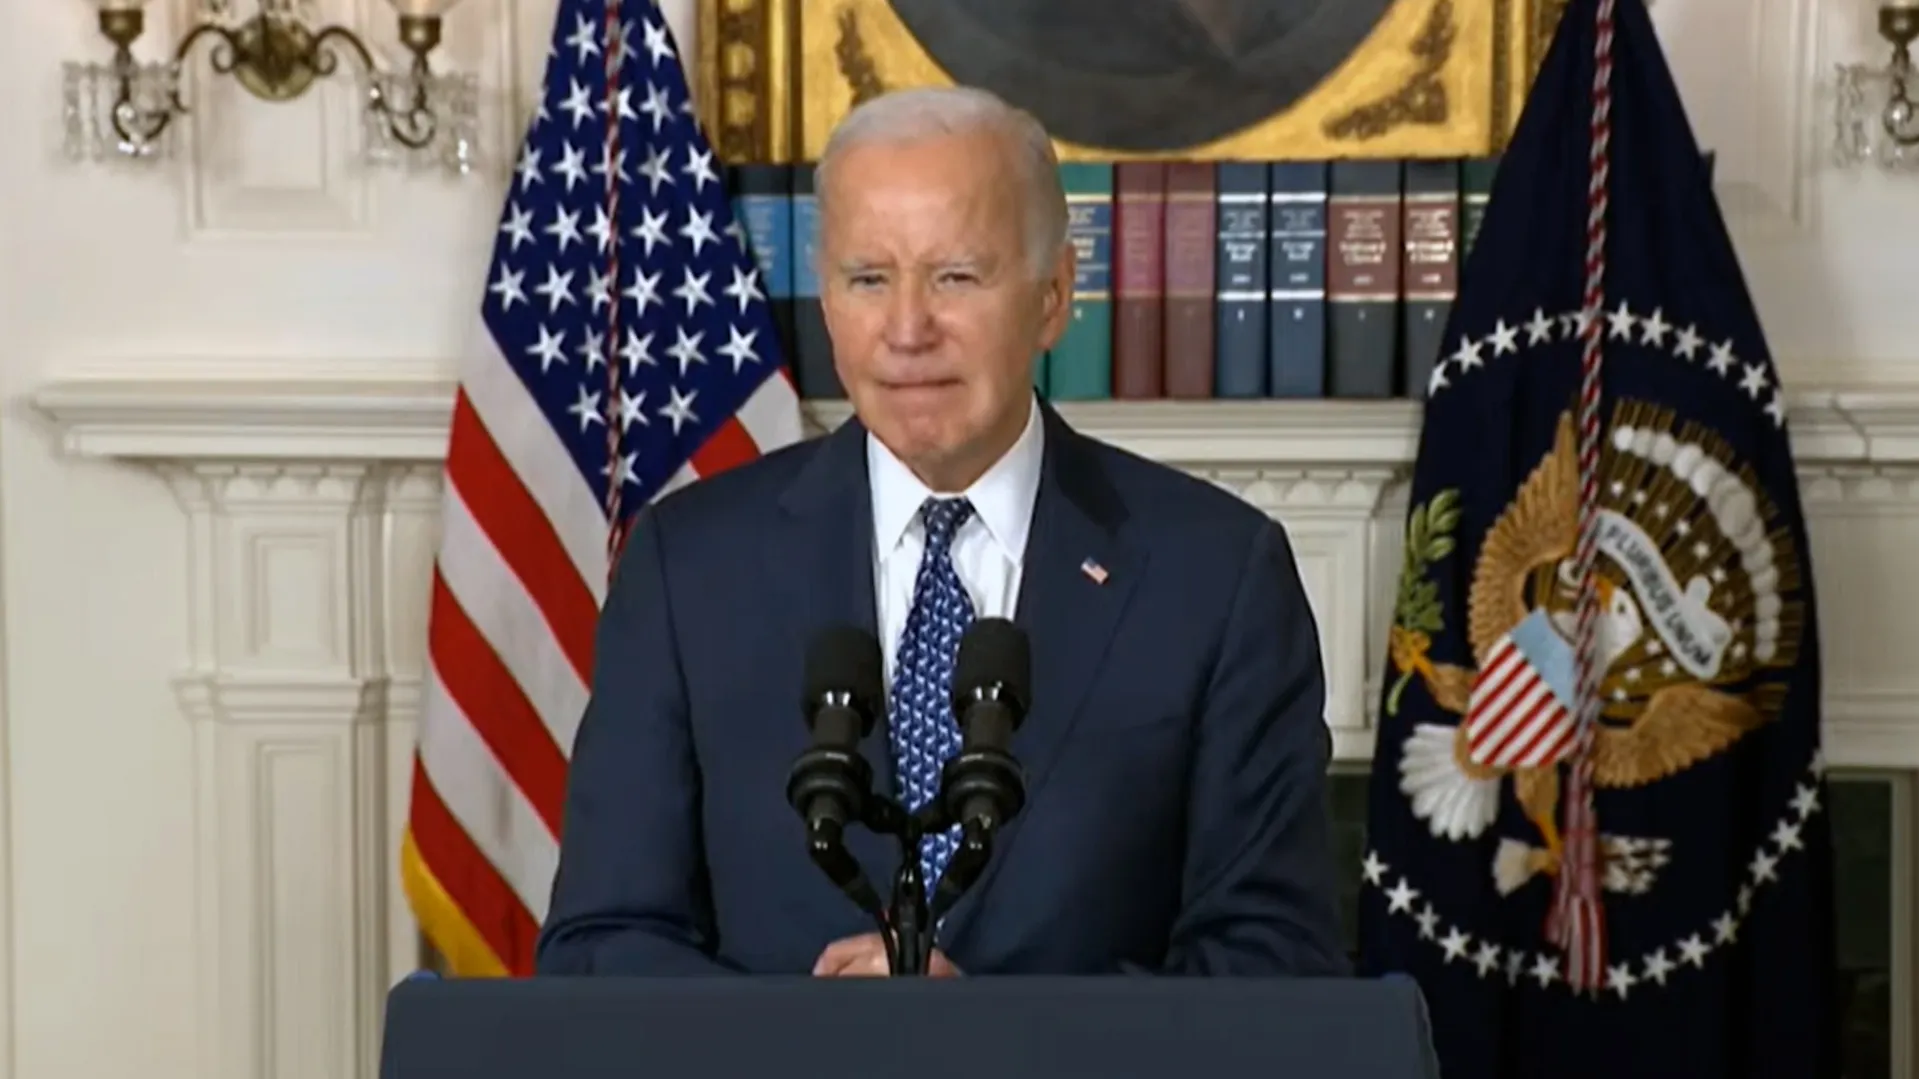 Special counsel report investigating Biden out (Credits: USA Today)